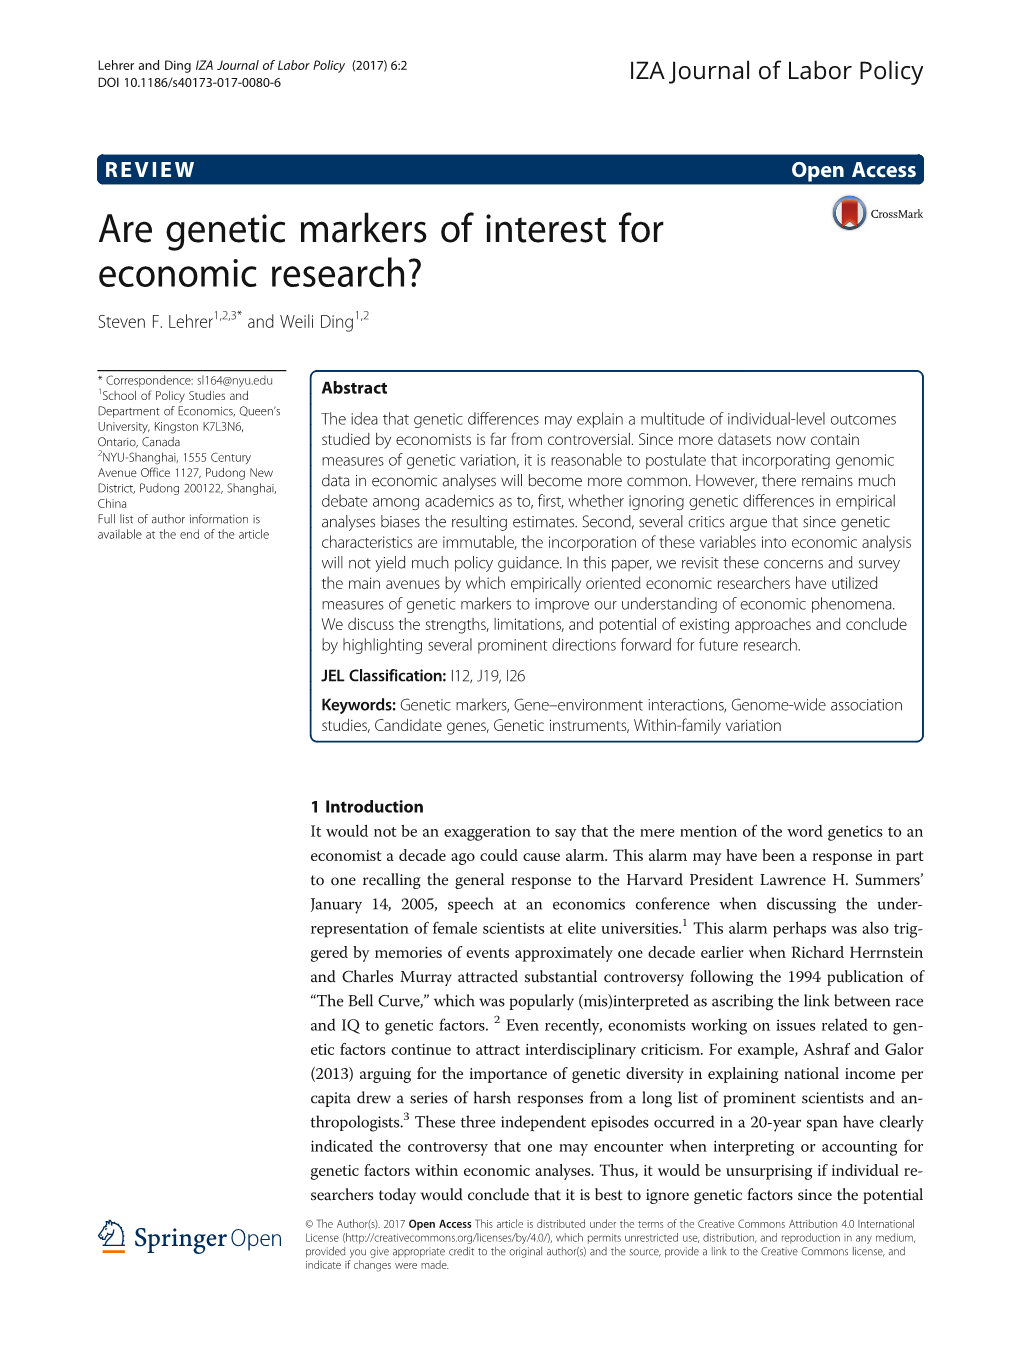 Are Genetic Markers of Interest for Economic Research? Steven F